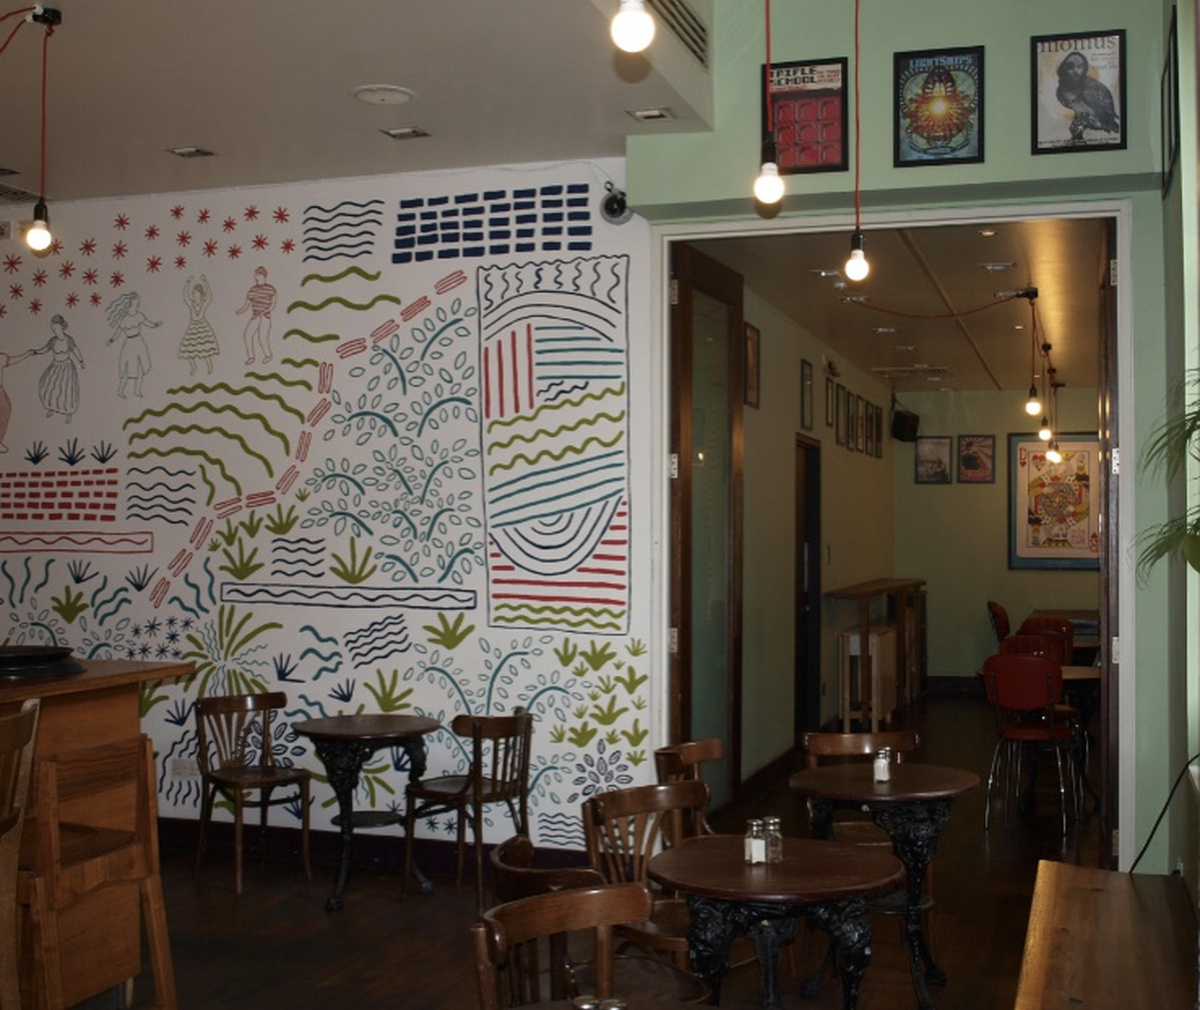 A photograph of the terrace bar interior, featuring wooden seats and round wooden tables and a large wall mural.